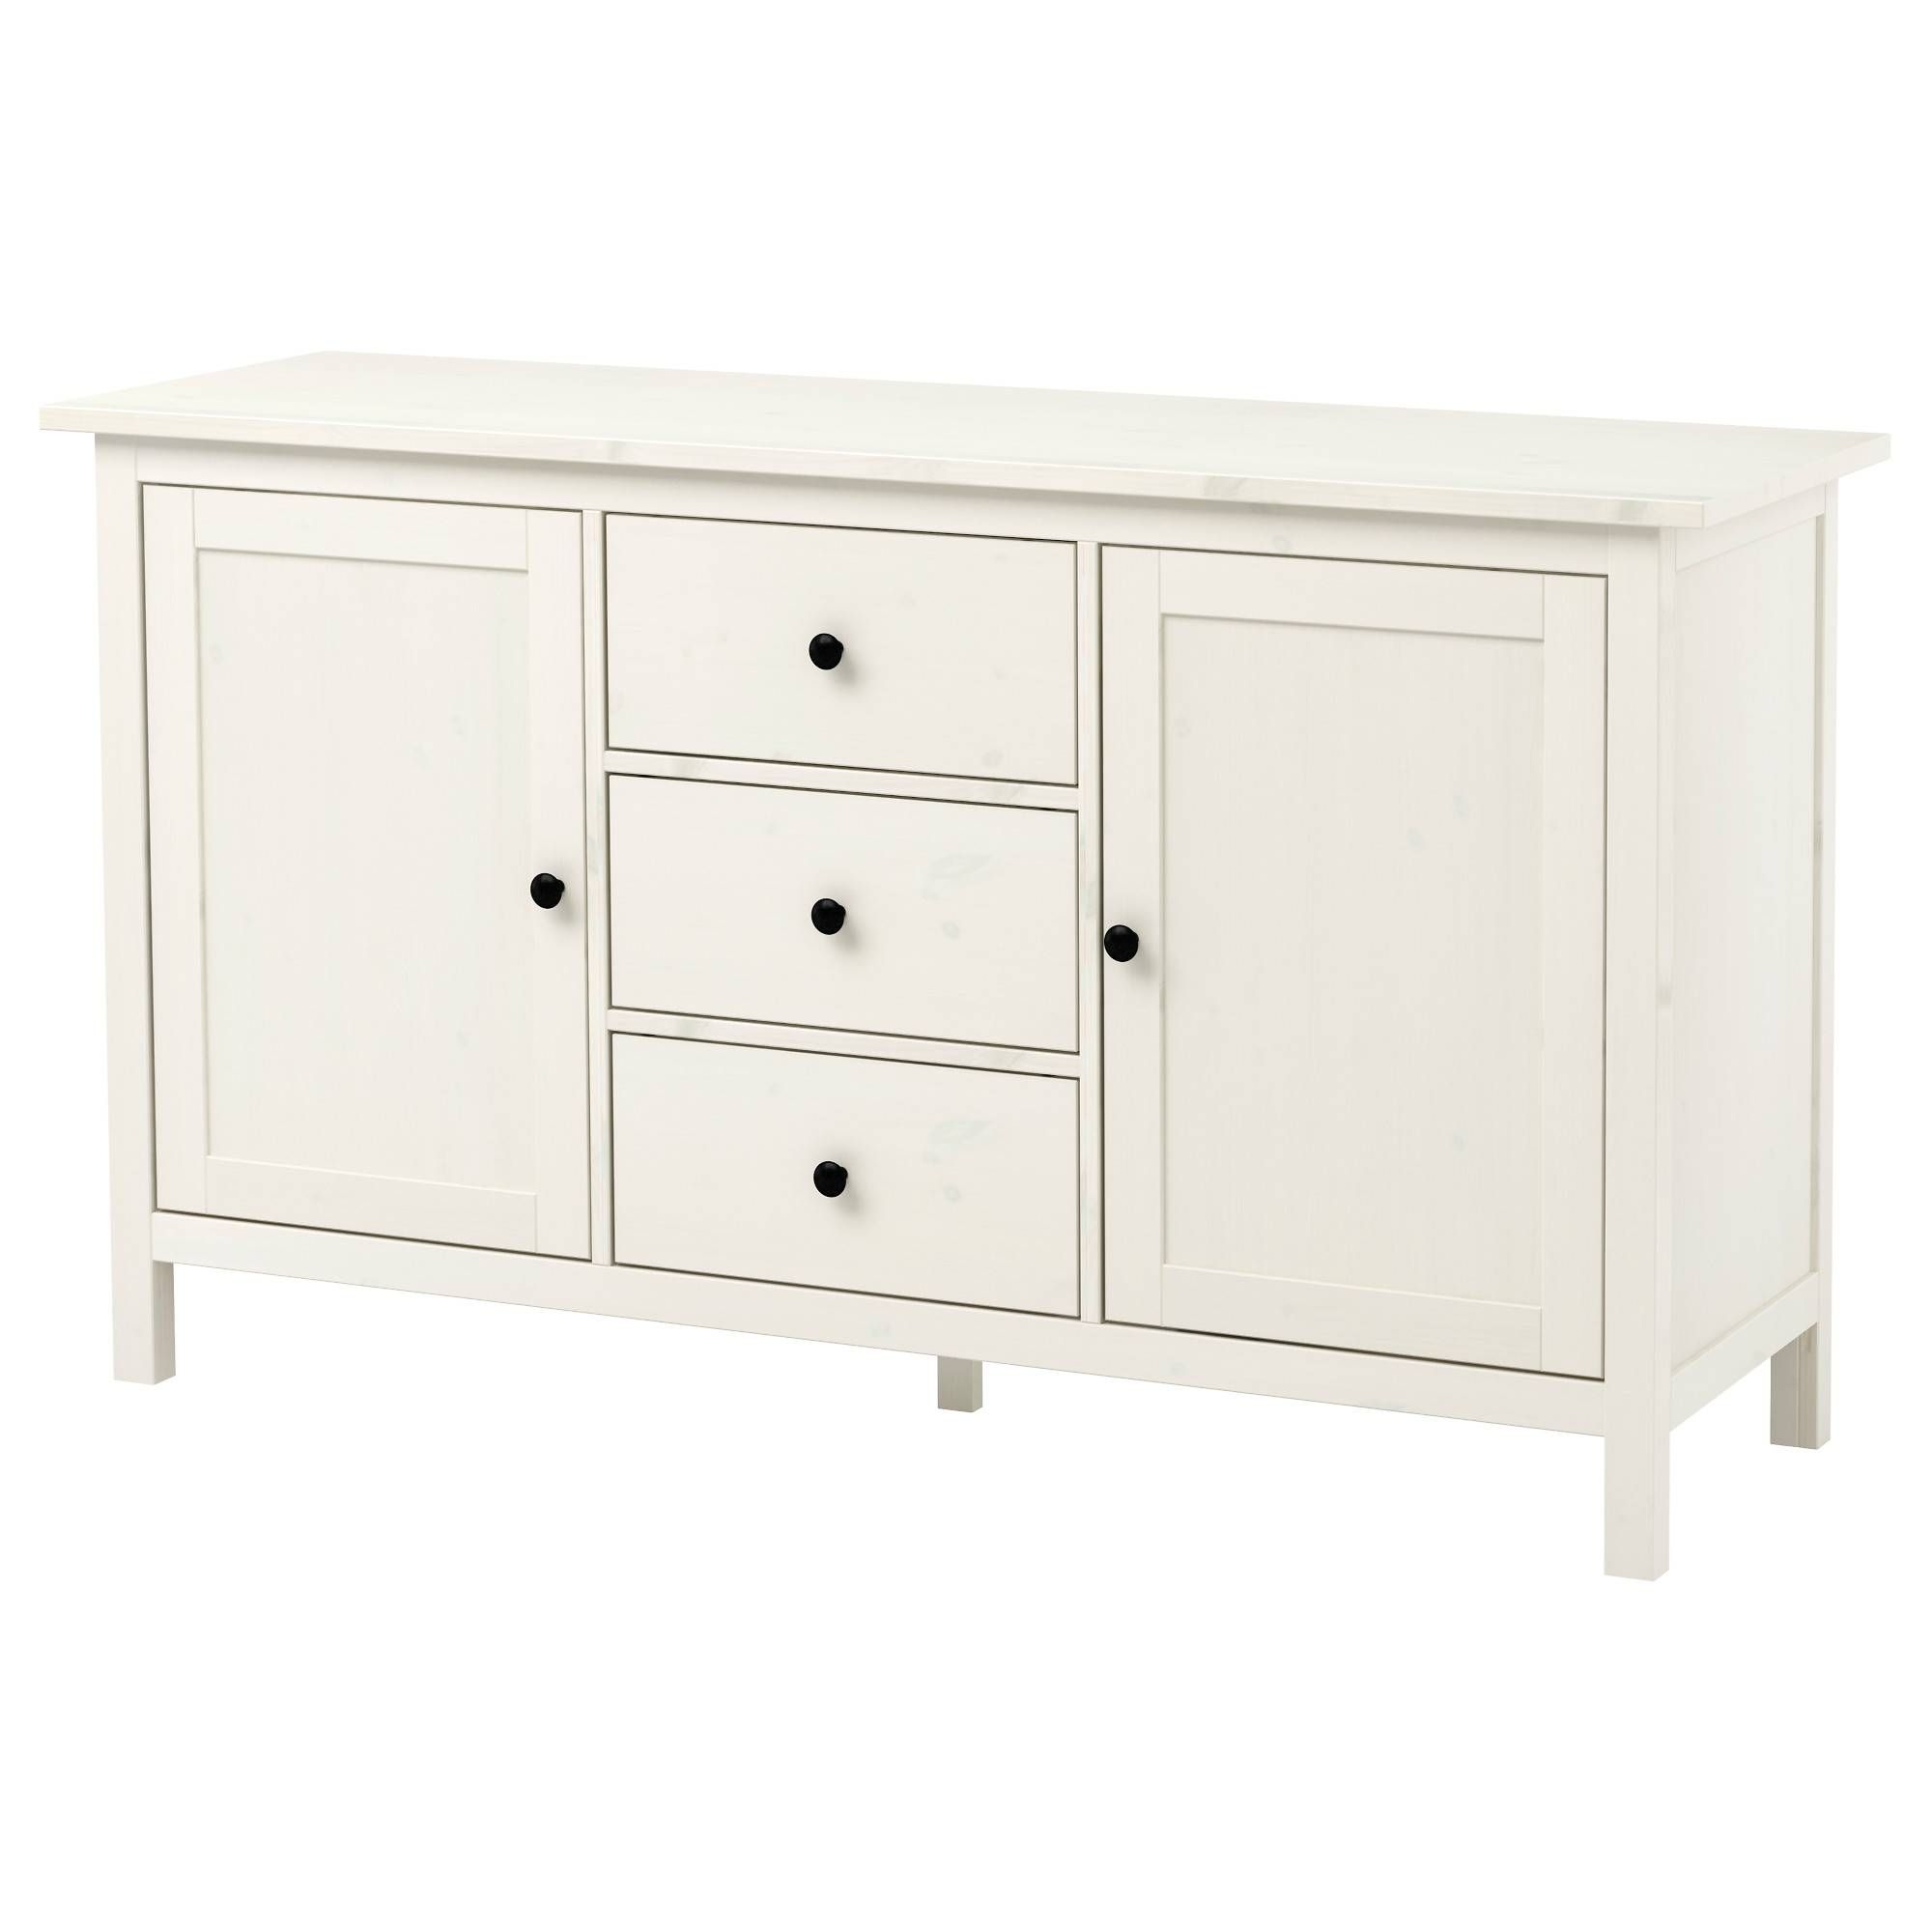 Hemnes Sideboard White Stain 157x88 Cm – Ikea Within Ikea Sideboards (View 4 of 15)